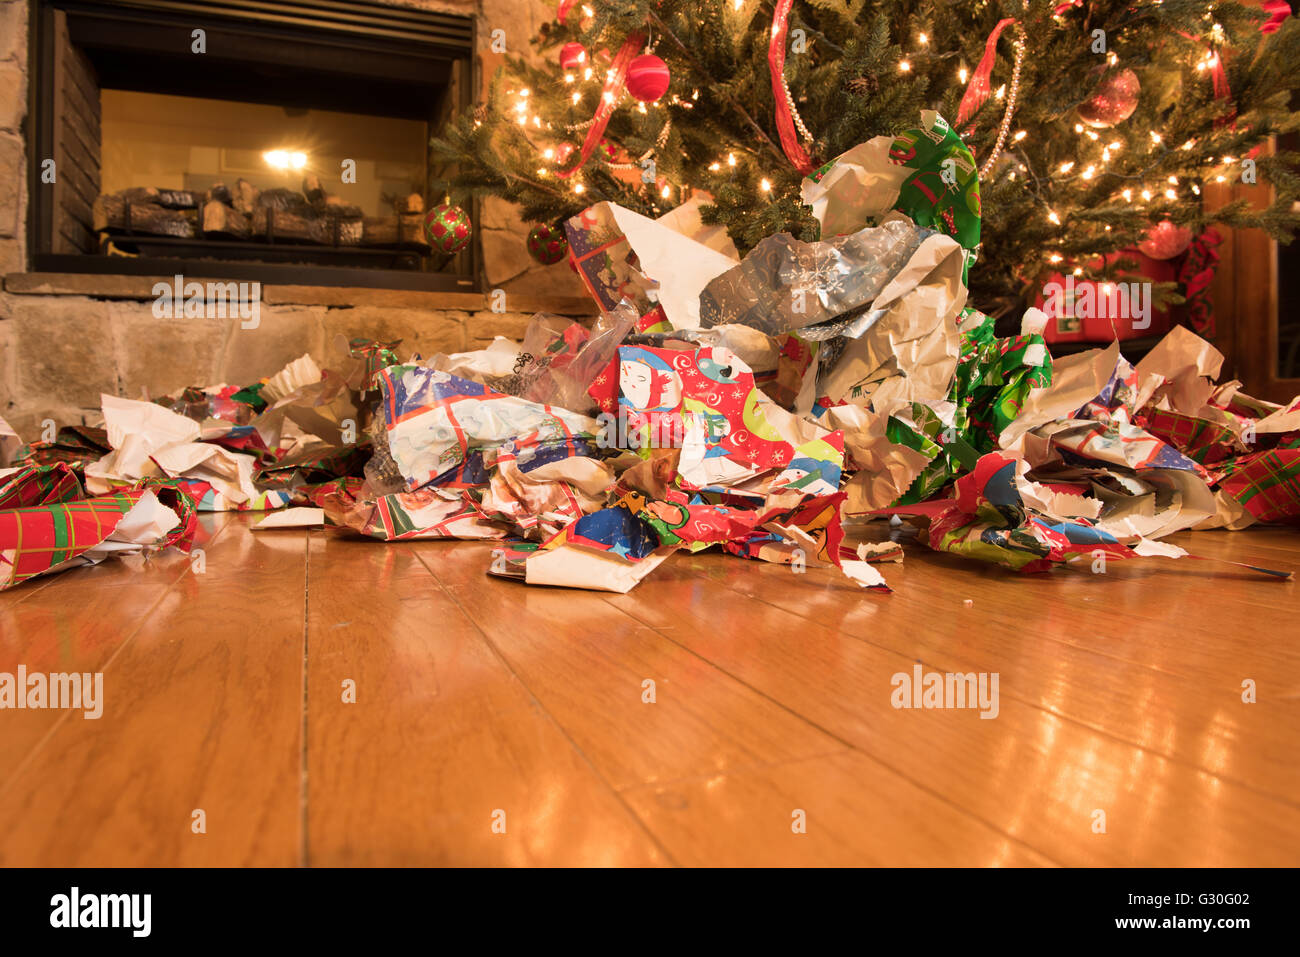 Mess of wrapping paper after all the gifts have been opened. Stock Photo